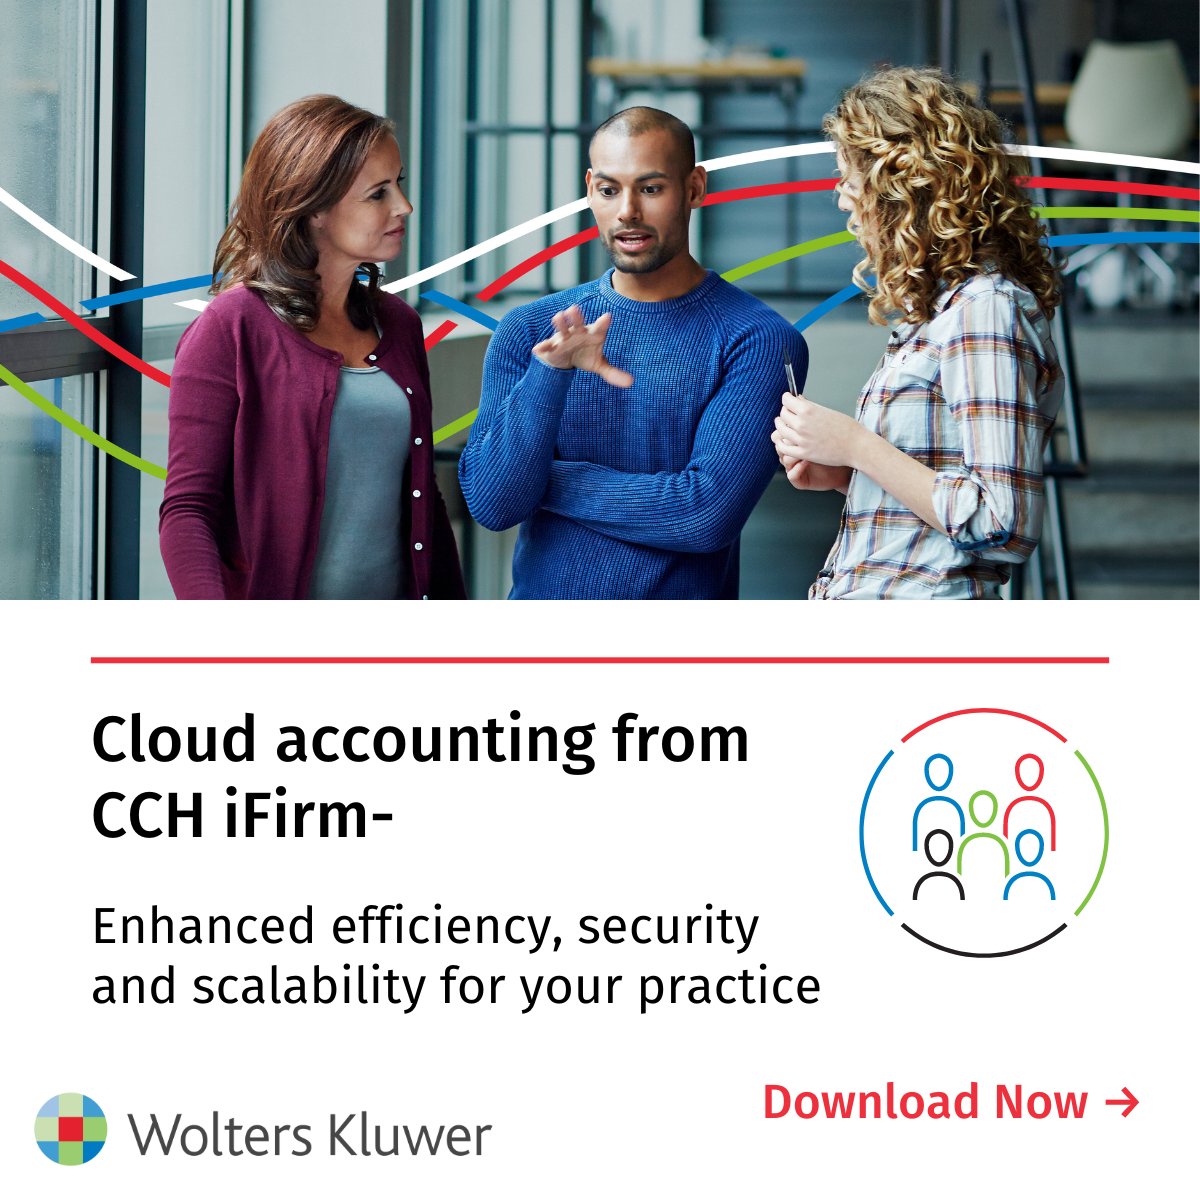 Explore the advantages of cloud accounting-based software with our comprehensive eBook. Discover expert insights and unlock the efficiency of CCH iFirm's cloud solutions for your practice. Download our eBook now- bit.ly/3SVof32 #Cloudbasedsolutions #Benefitsofcloud #TAA